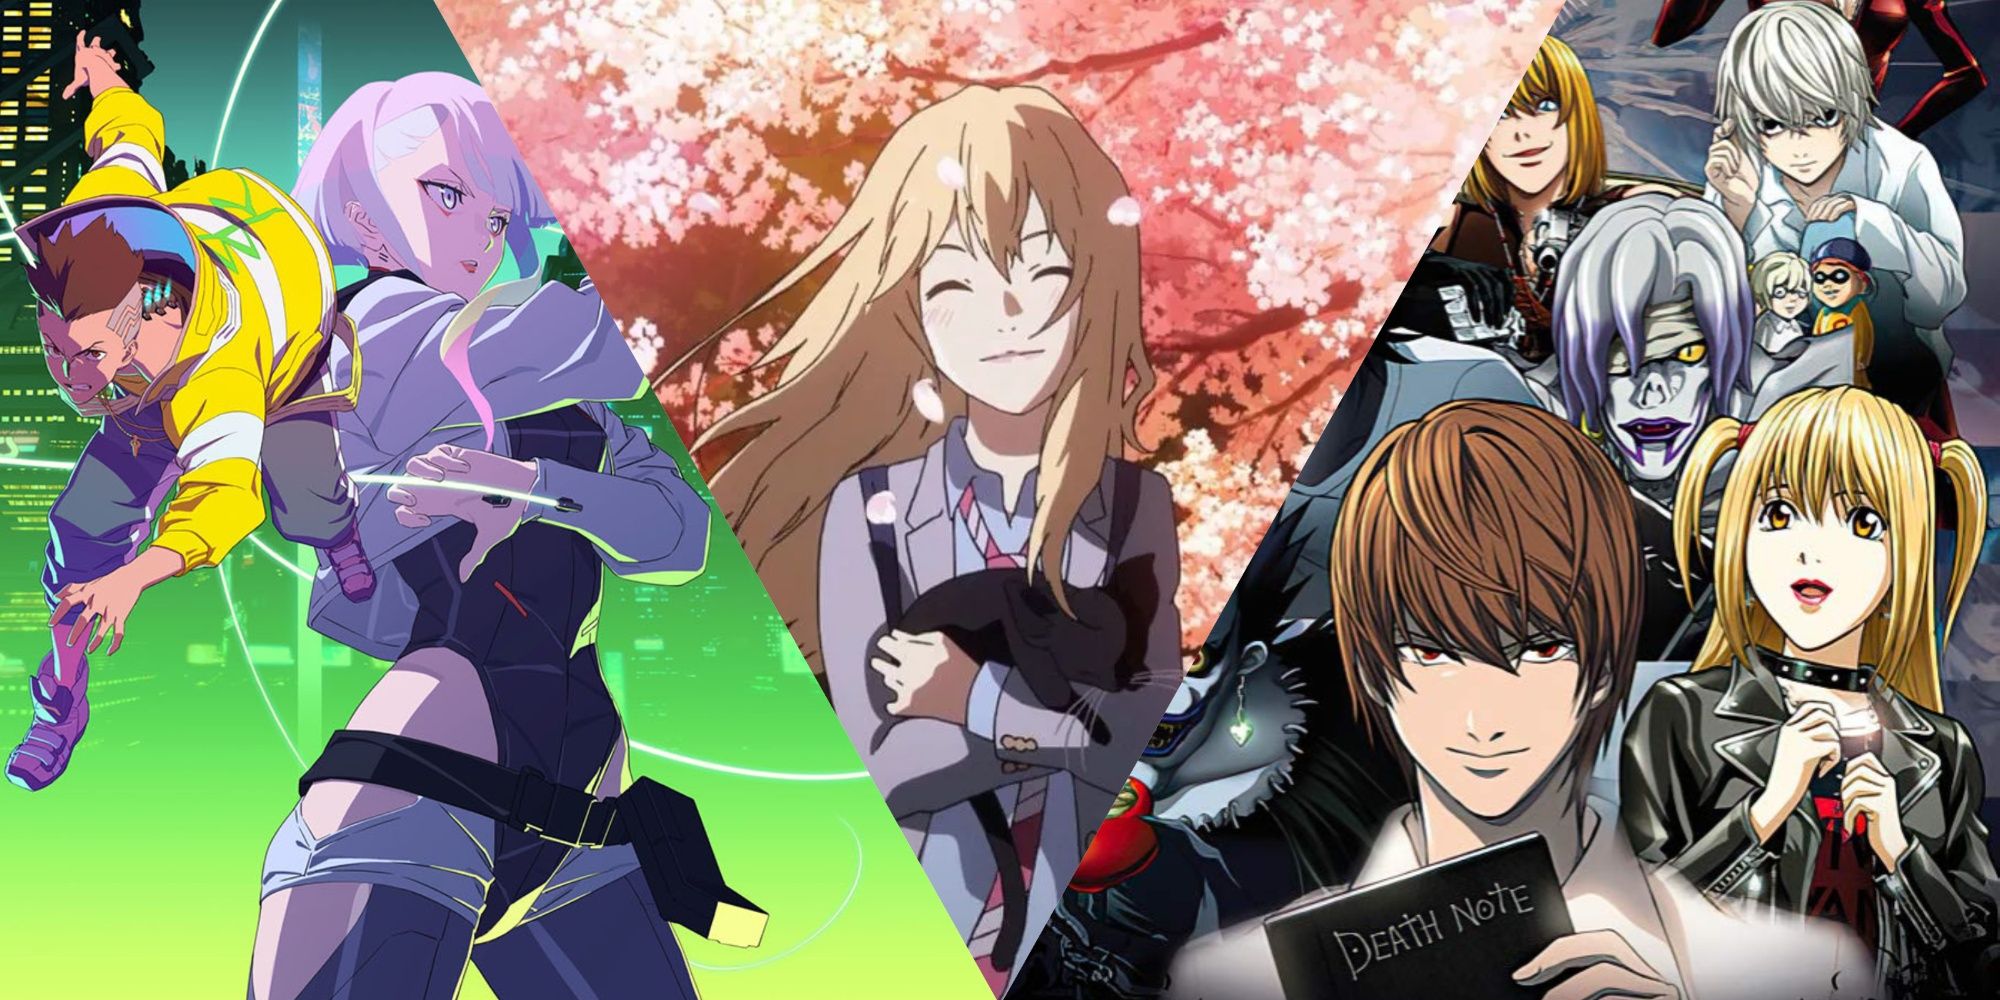 Cyberpunk , Your Lie In April and Death Note